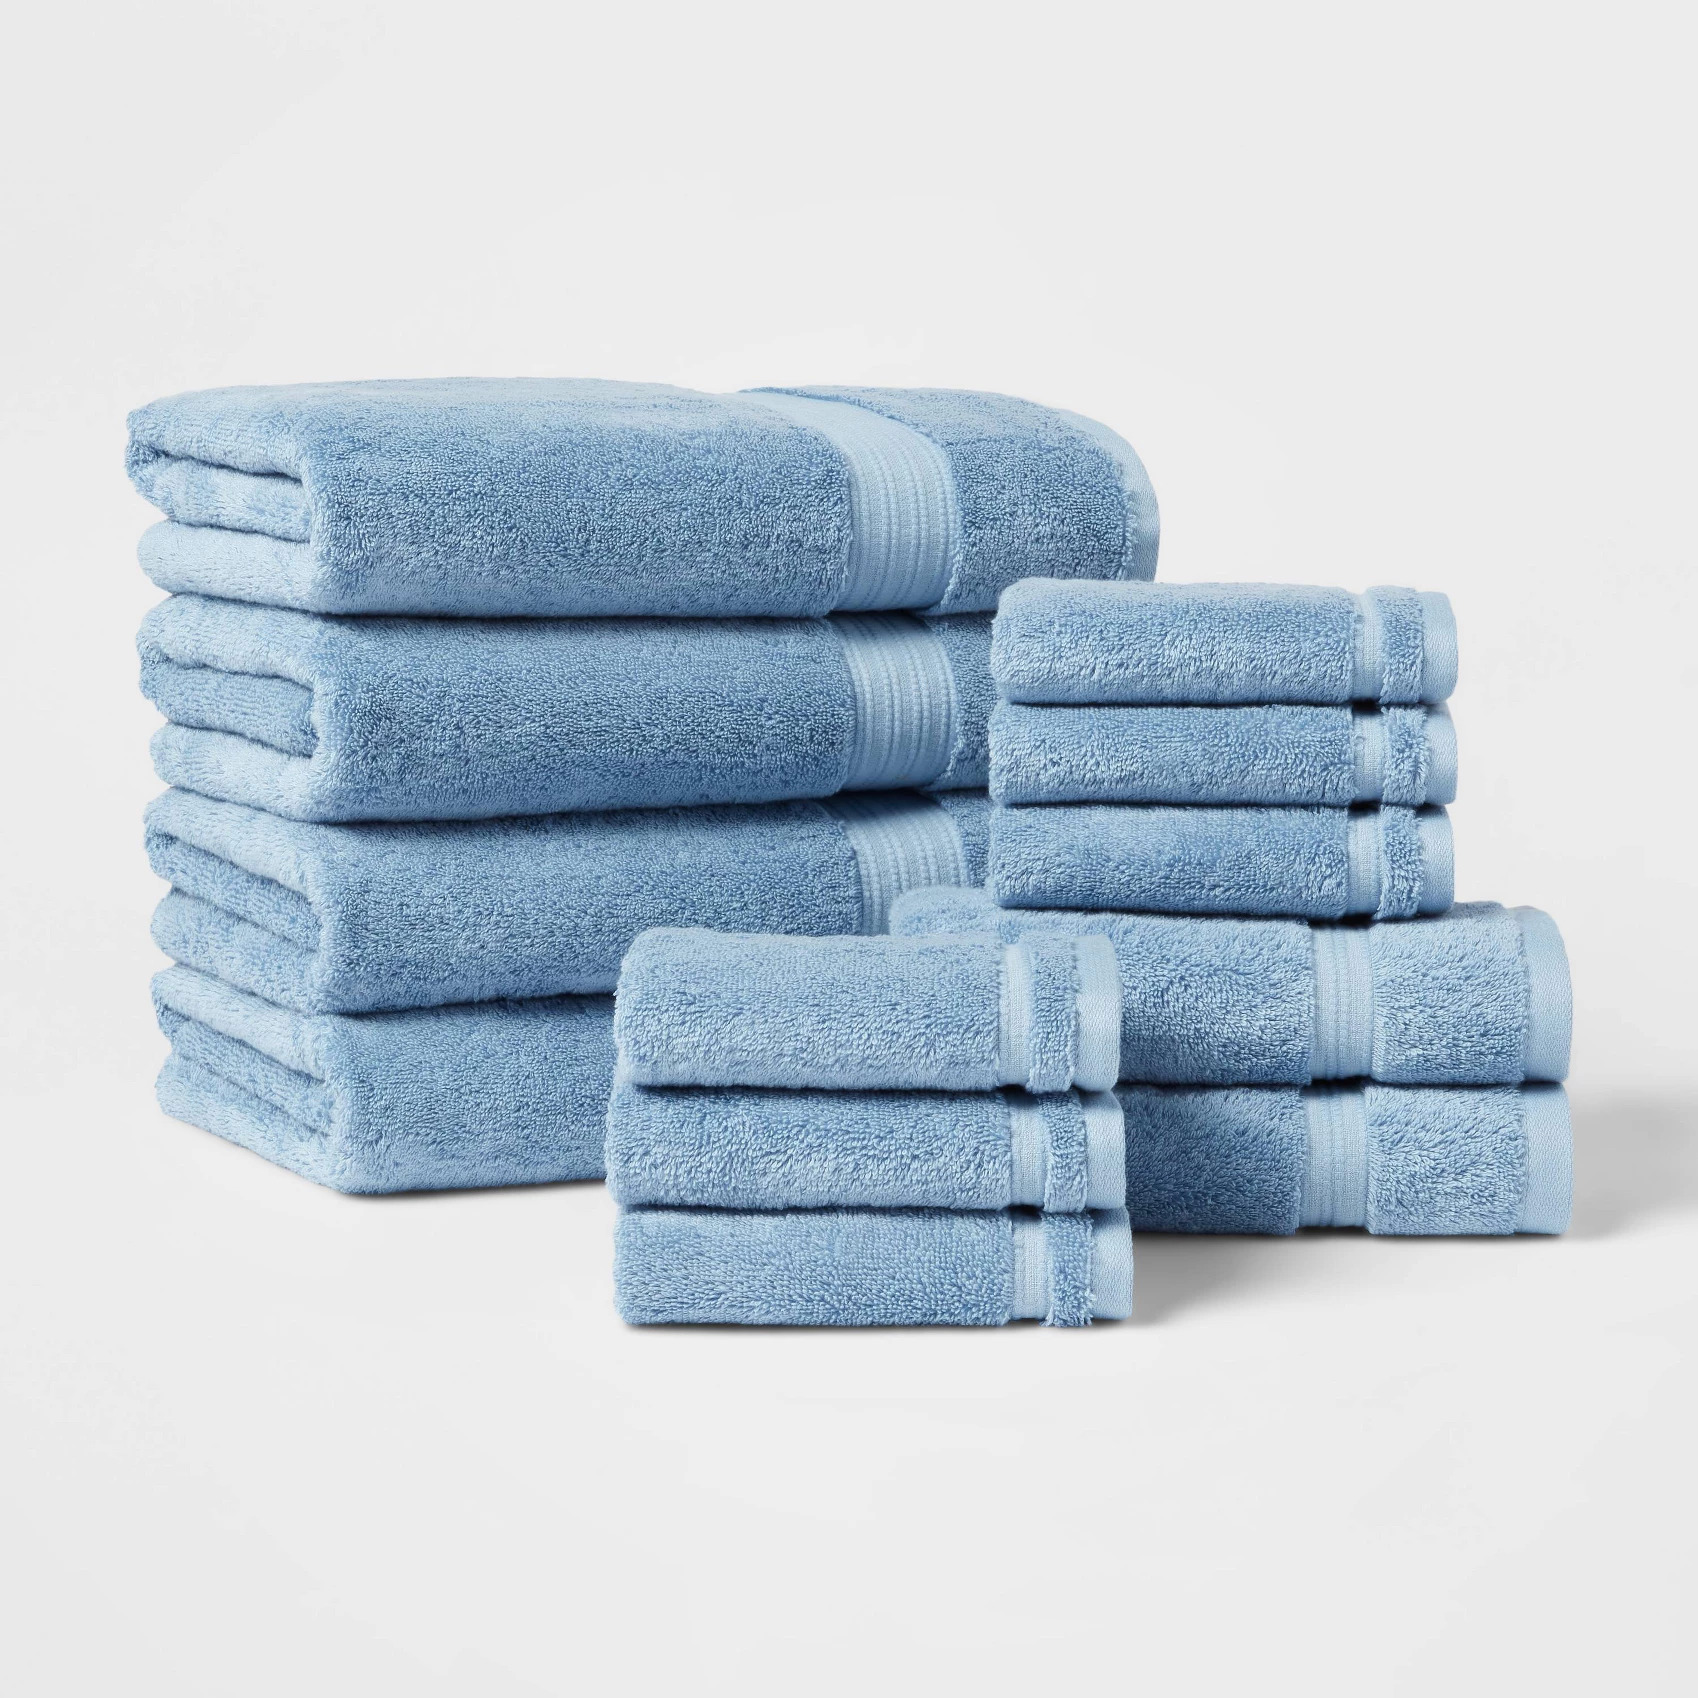 12pk Antimicrobial Starter Towel set from $20 at Target